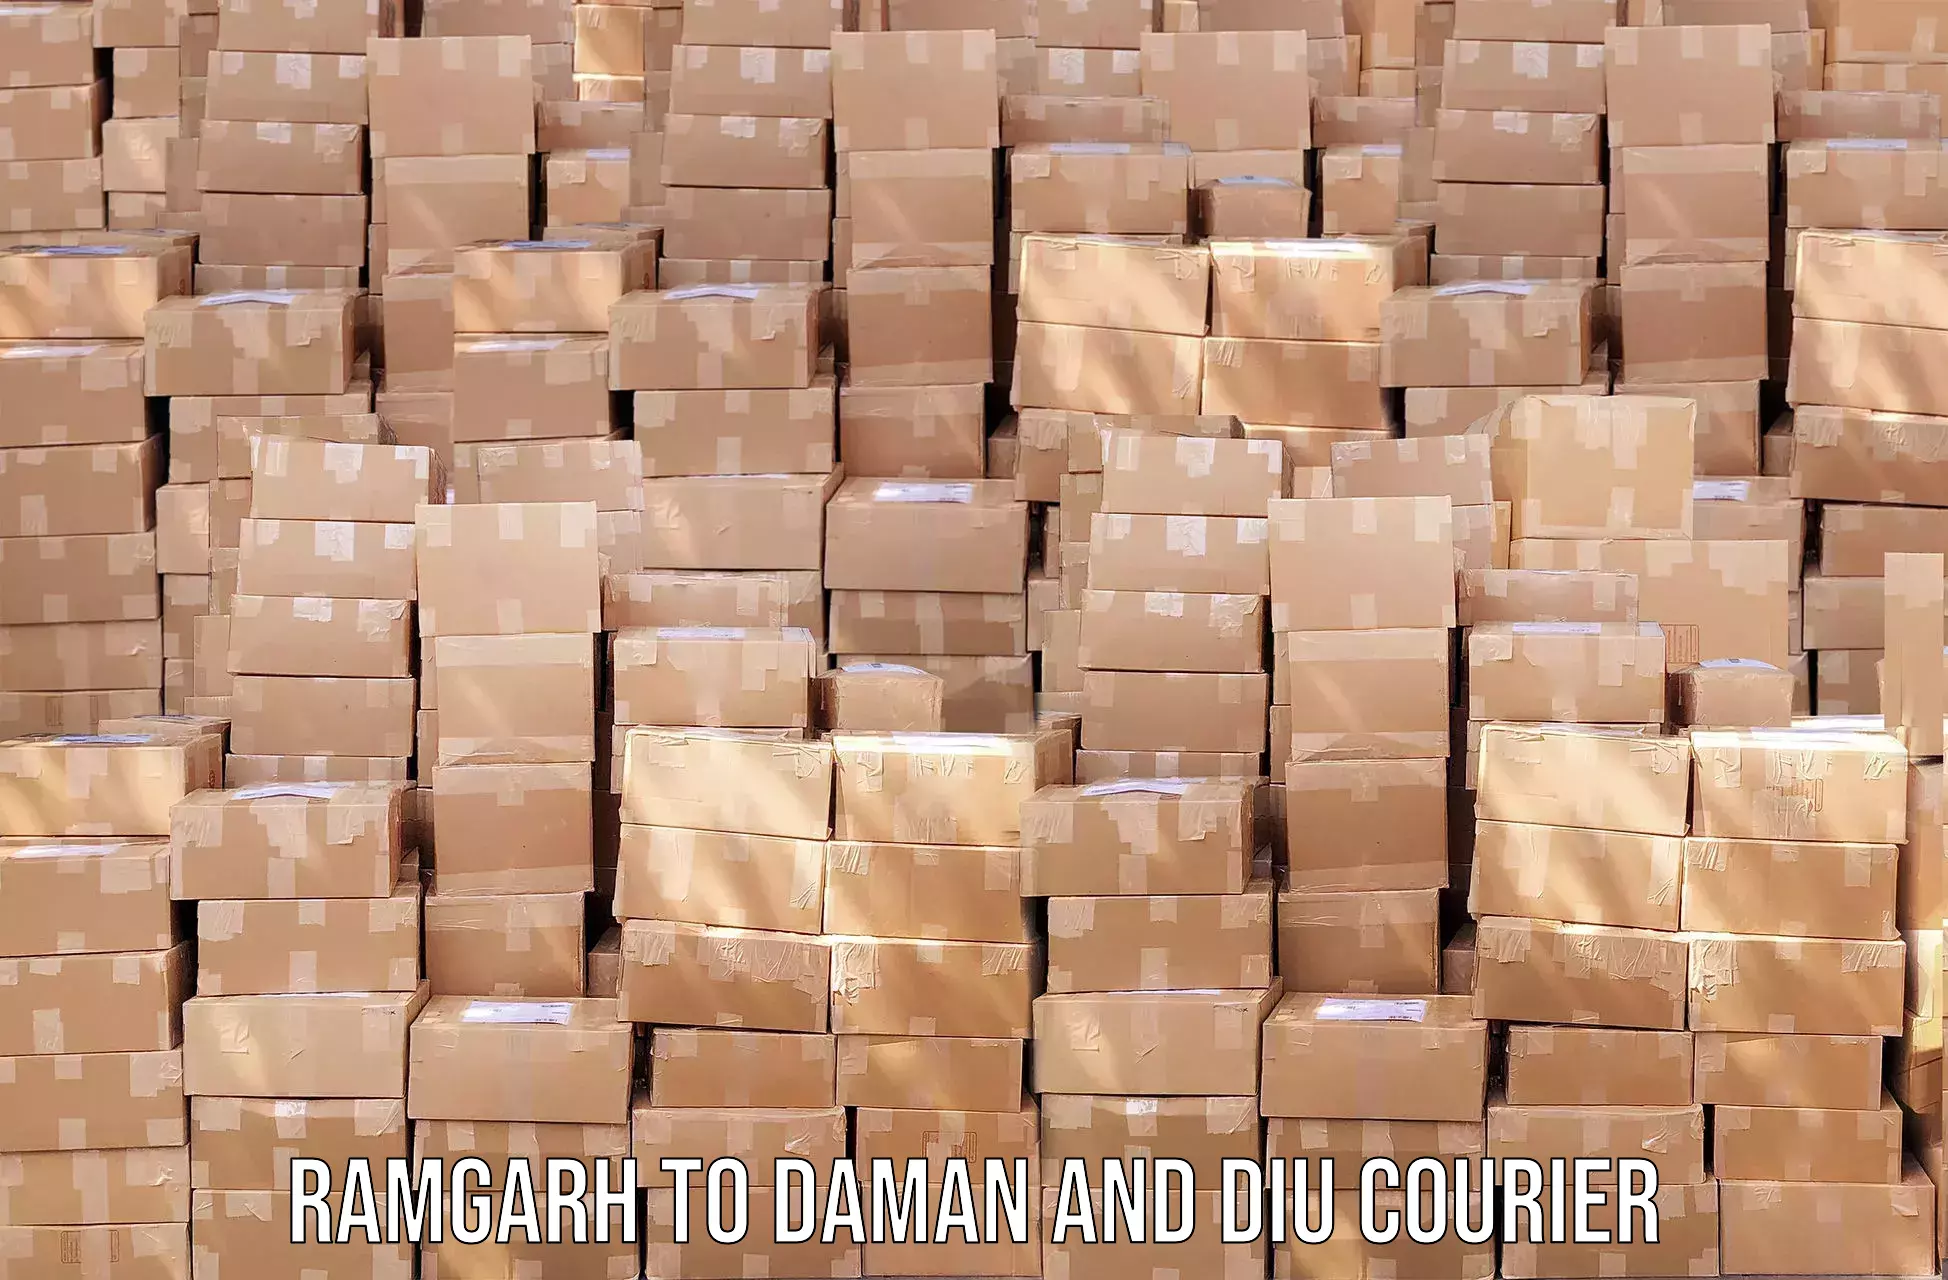 Parcel service for businesses in Ramgarh to Daman and Diu